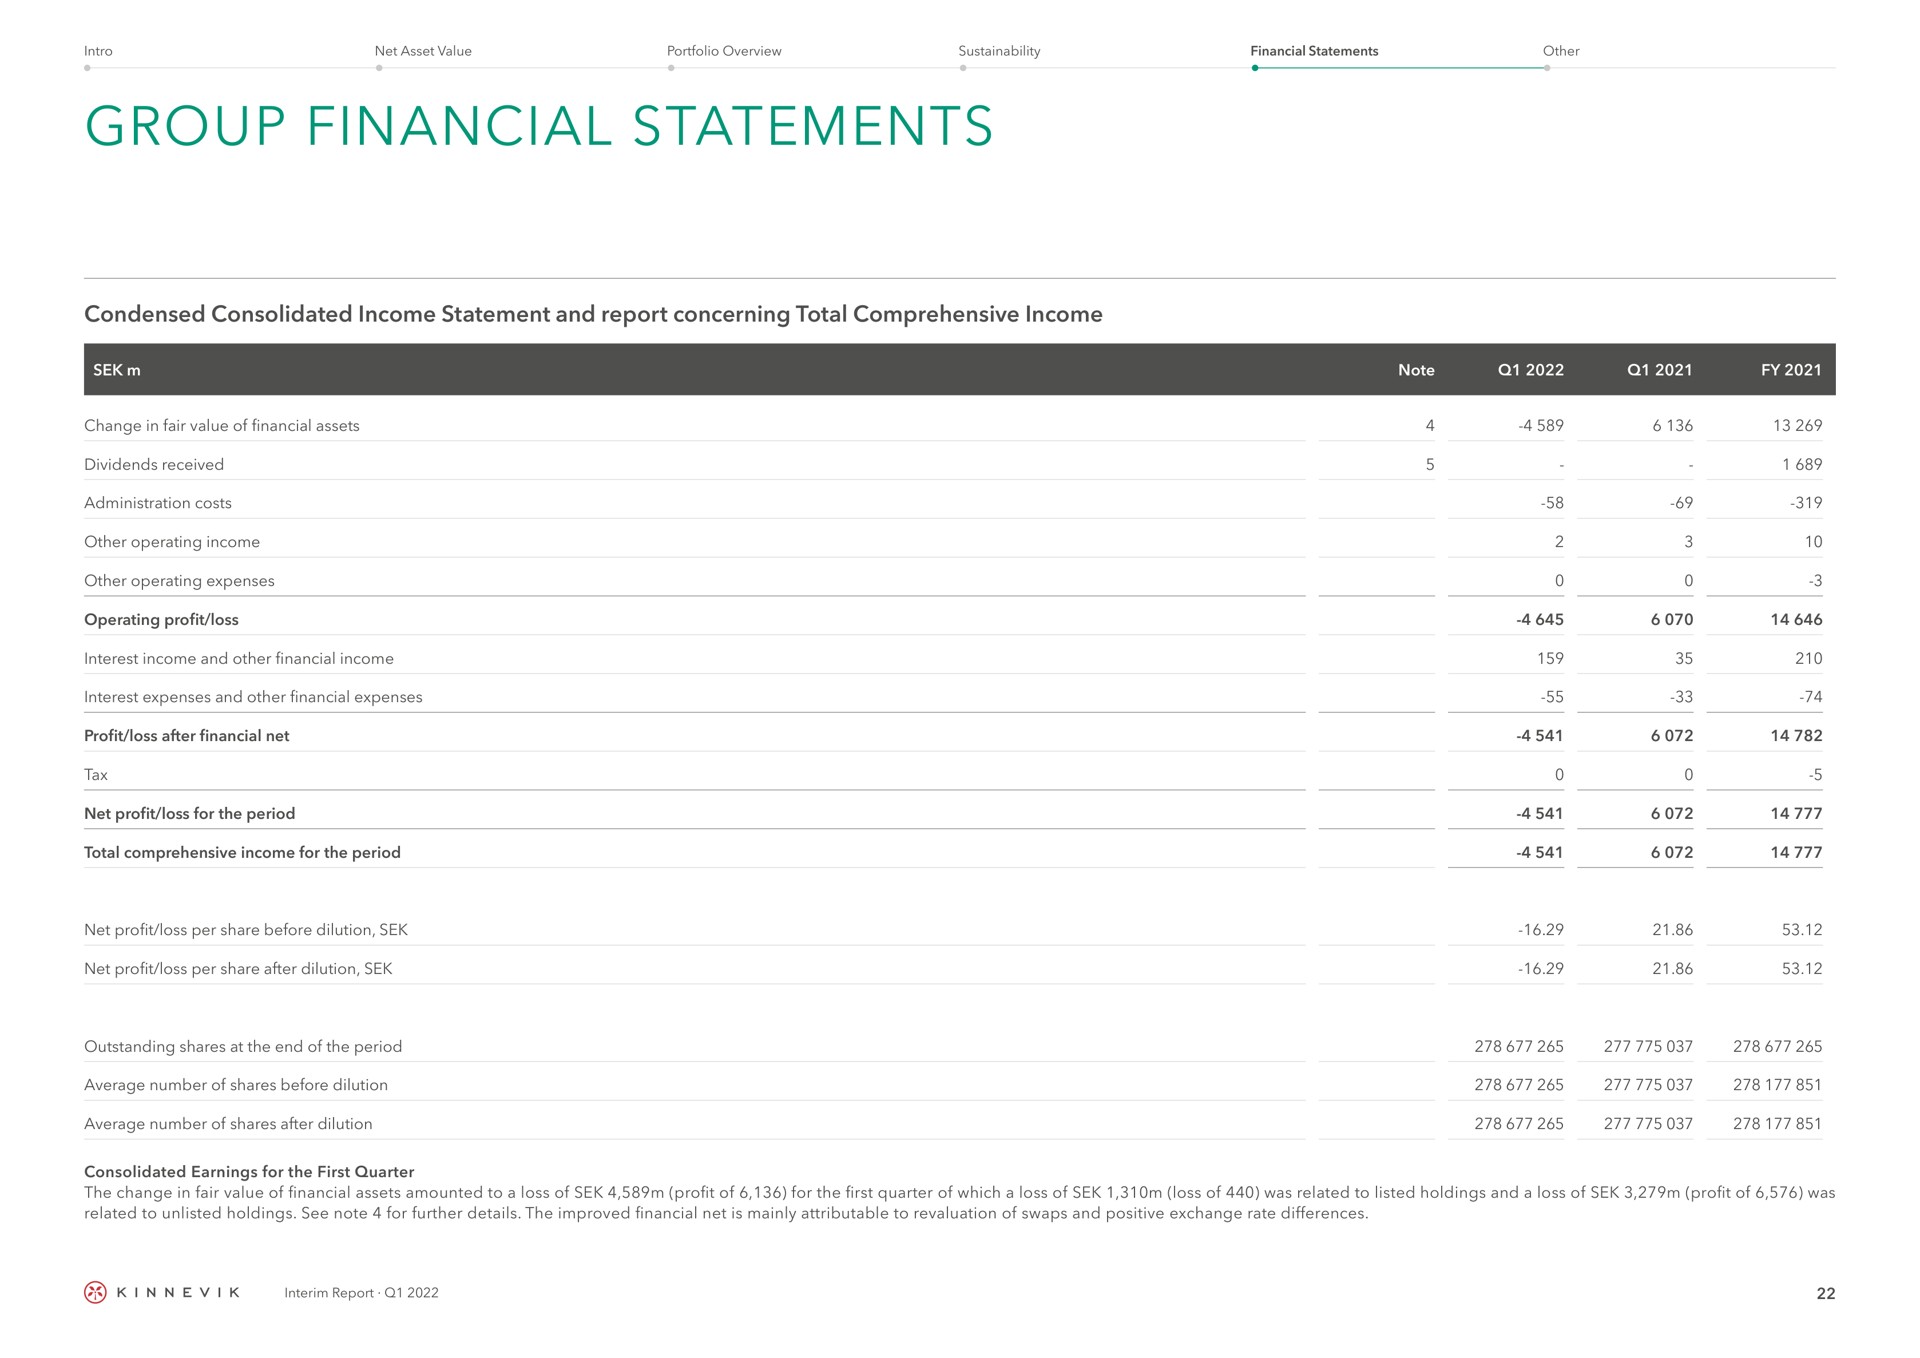 group financial statements condensed consolidated income statement and report concerning total comprehensive income interim | Kinnevik